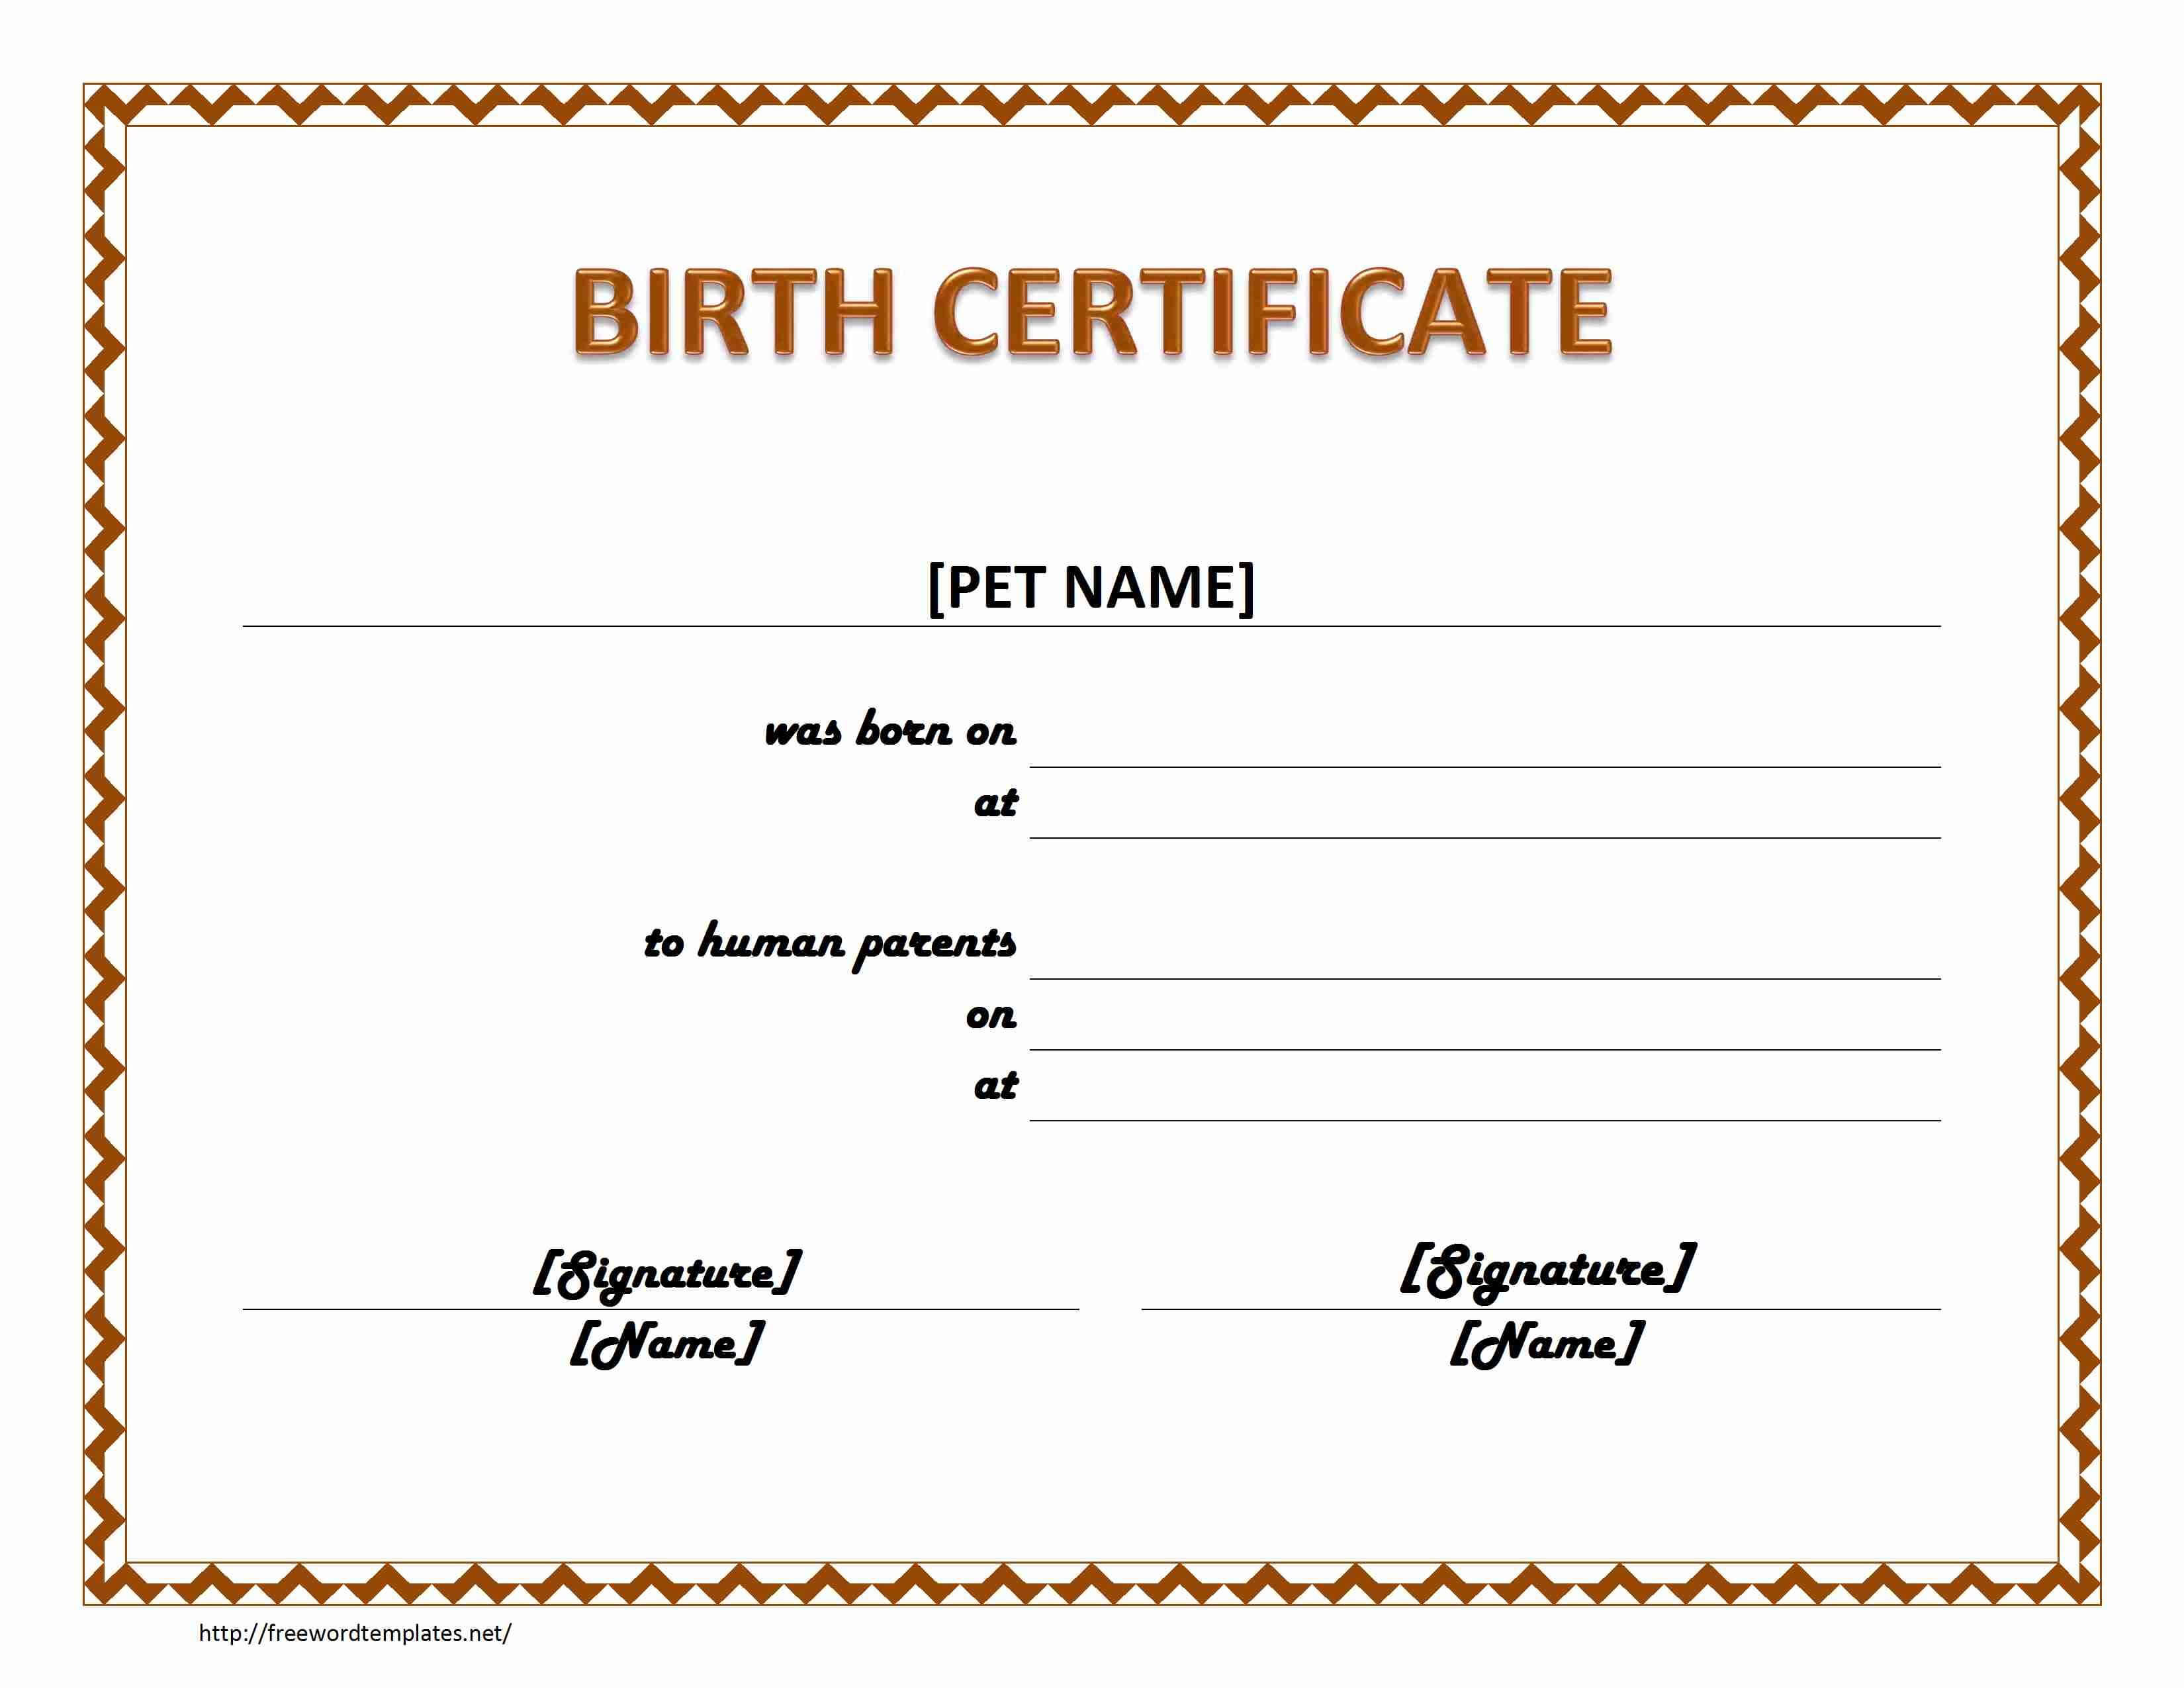 Pet Birth Certificate Maker | Pet Birth Certificate For Word Regarding Birth Certificate Templates For Word